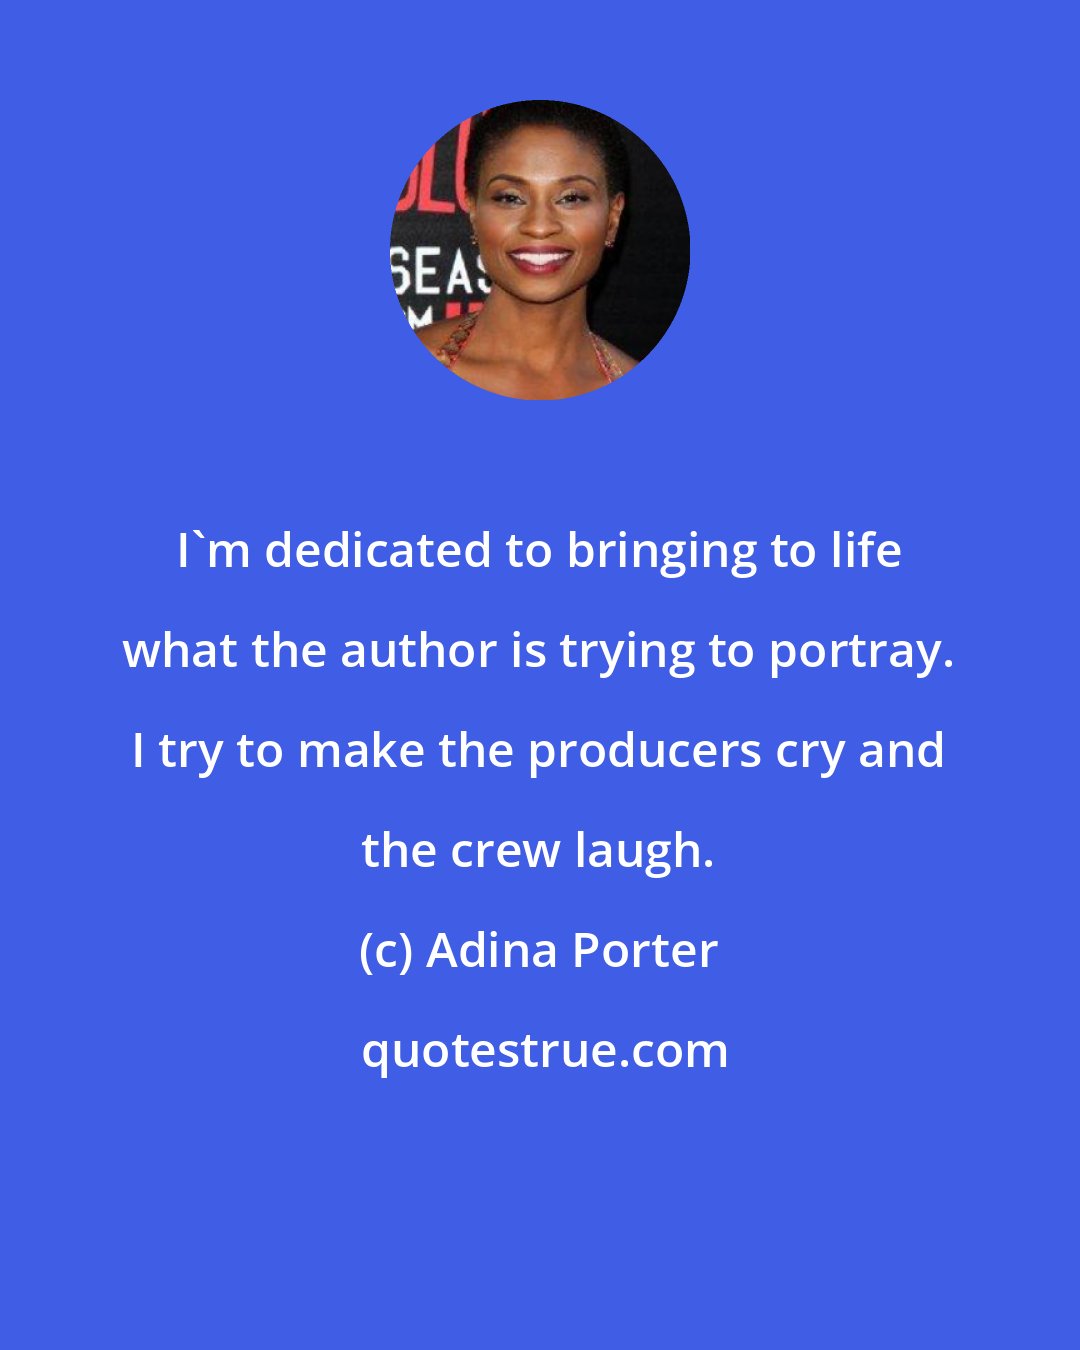 Adina Porter: I'm dedicated to bringing to life what the author is trying to portray. I try to make the producers cry and the crew laugh.